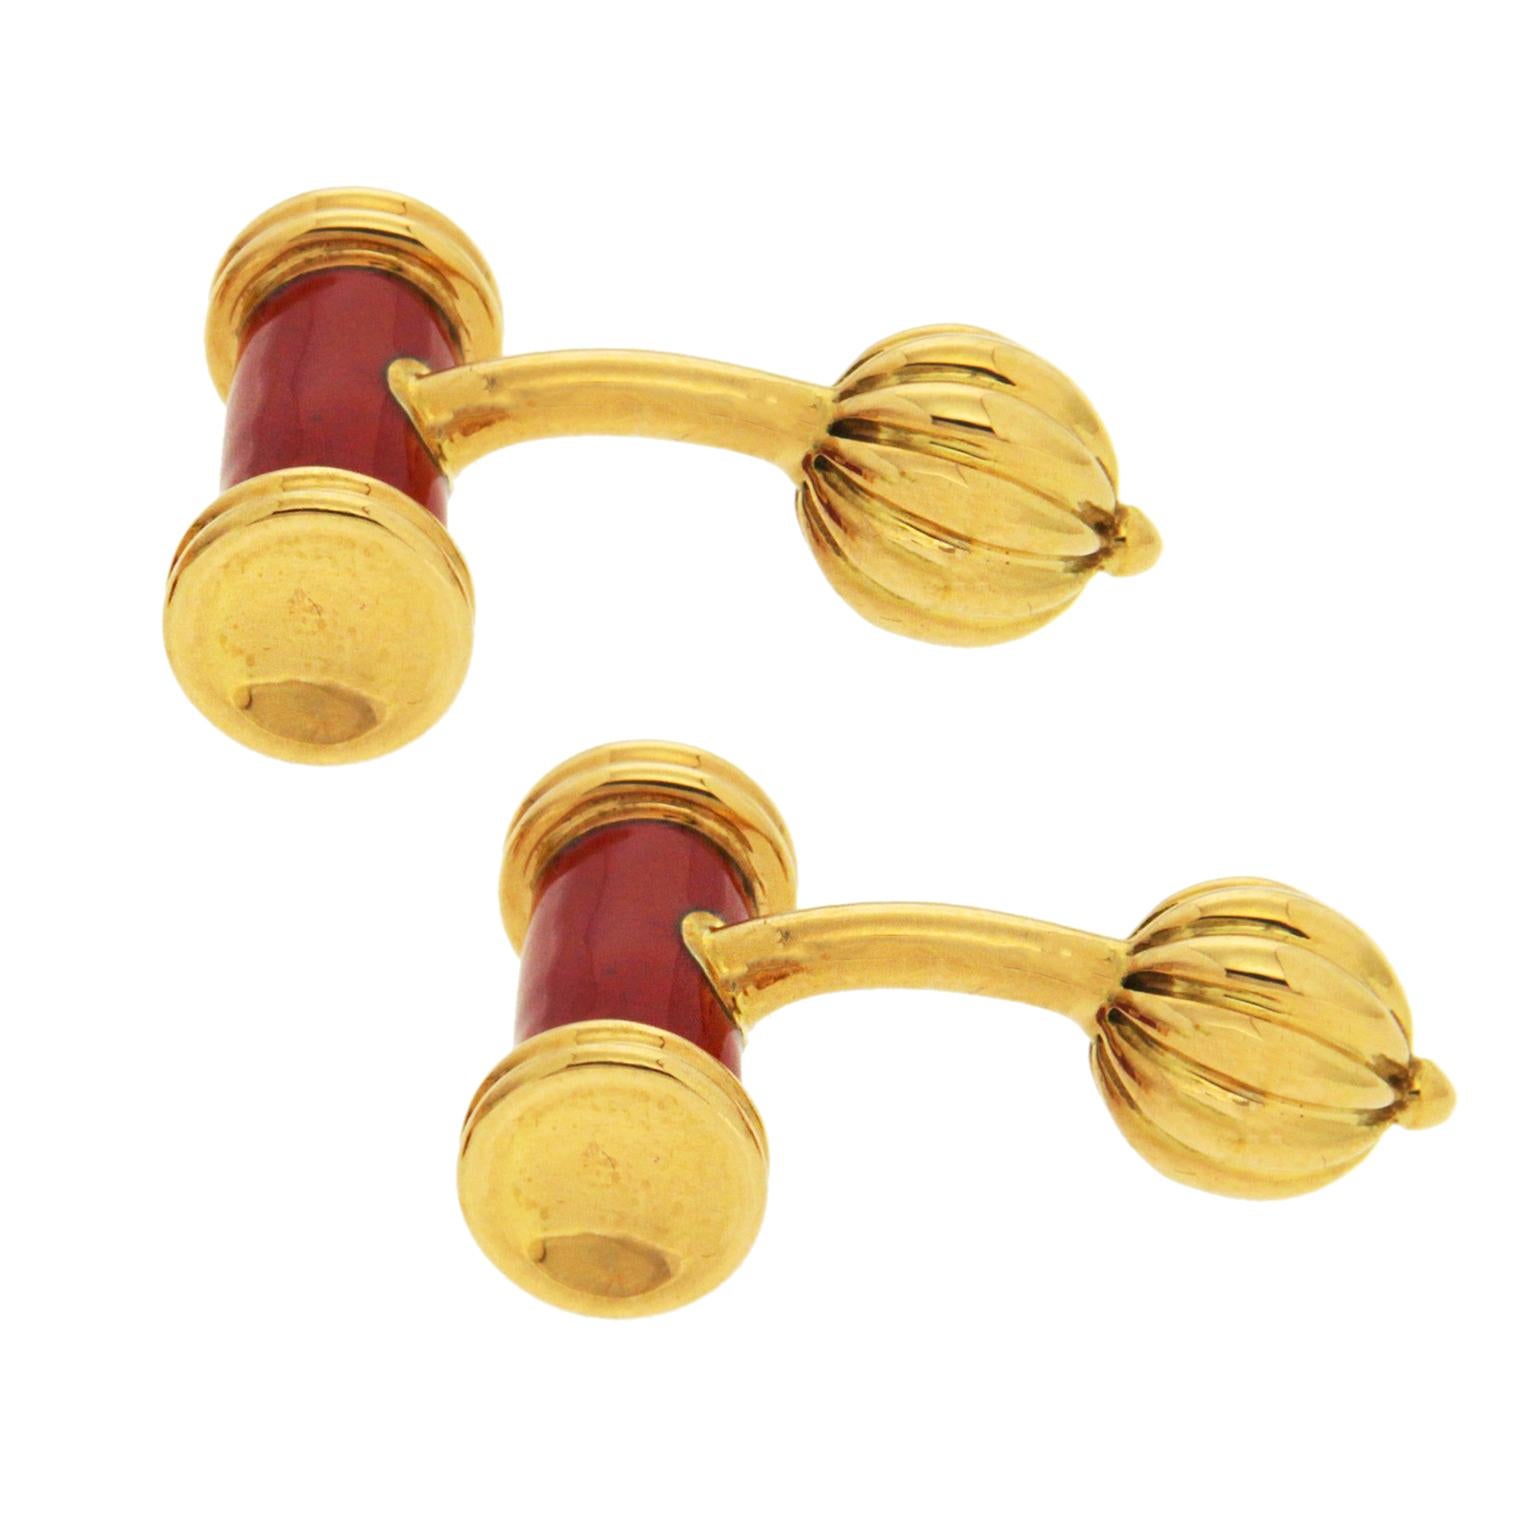 Warm colors make up these cufflinks. The fronts are bars with 18k yellow gold ends and a deep red enamel center. The reverse sides feature posts tipped with fluted balls. Each cufflink measures 0.35 inches wide, 0.71 inches long and 1.05 inches tall